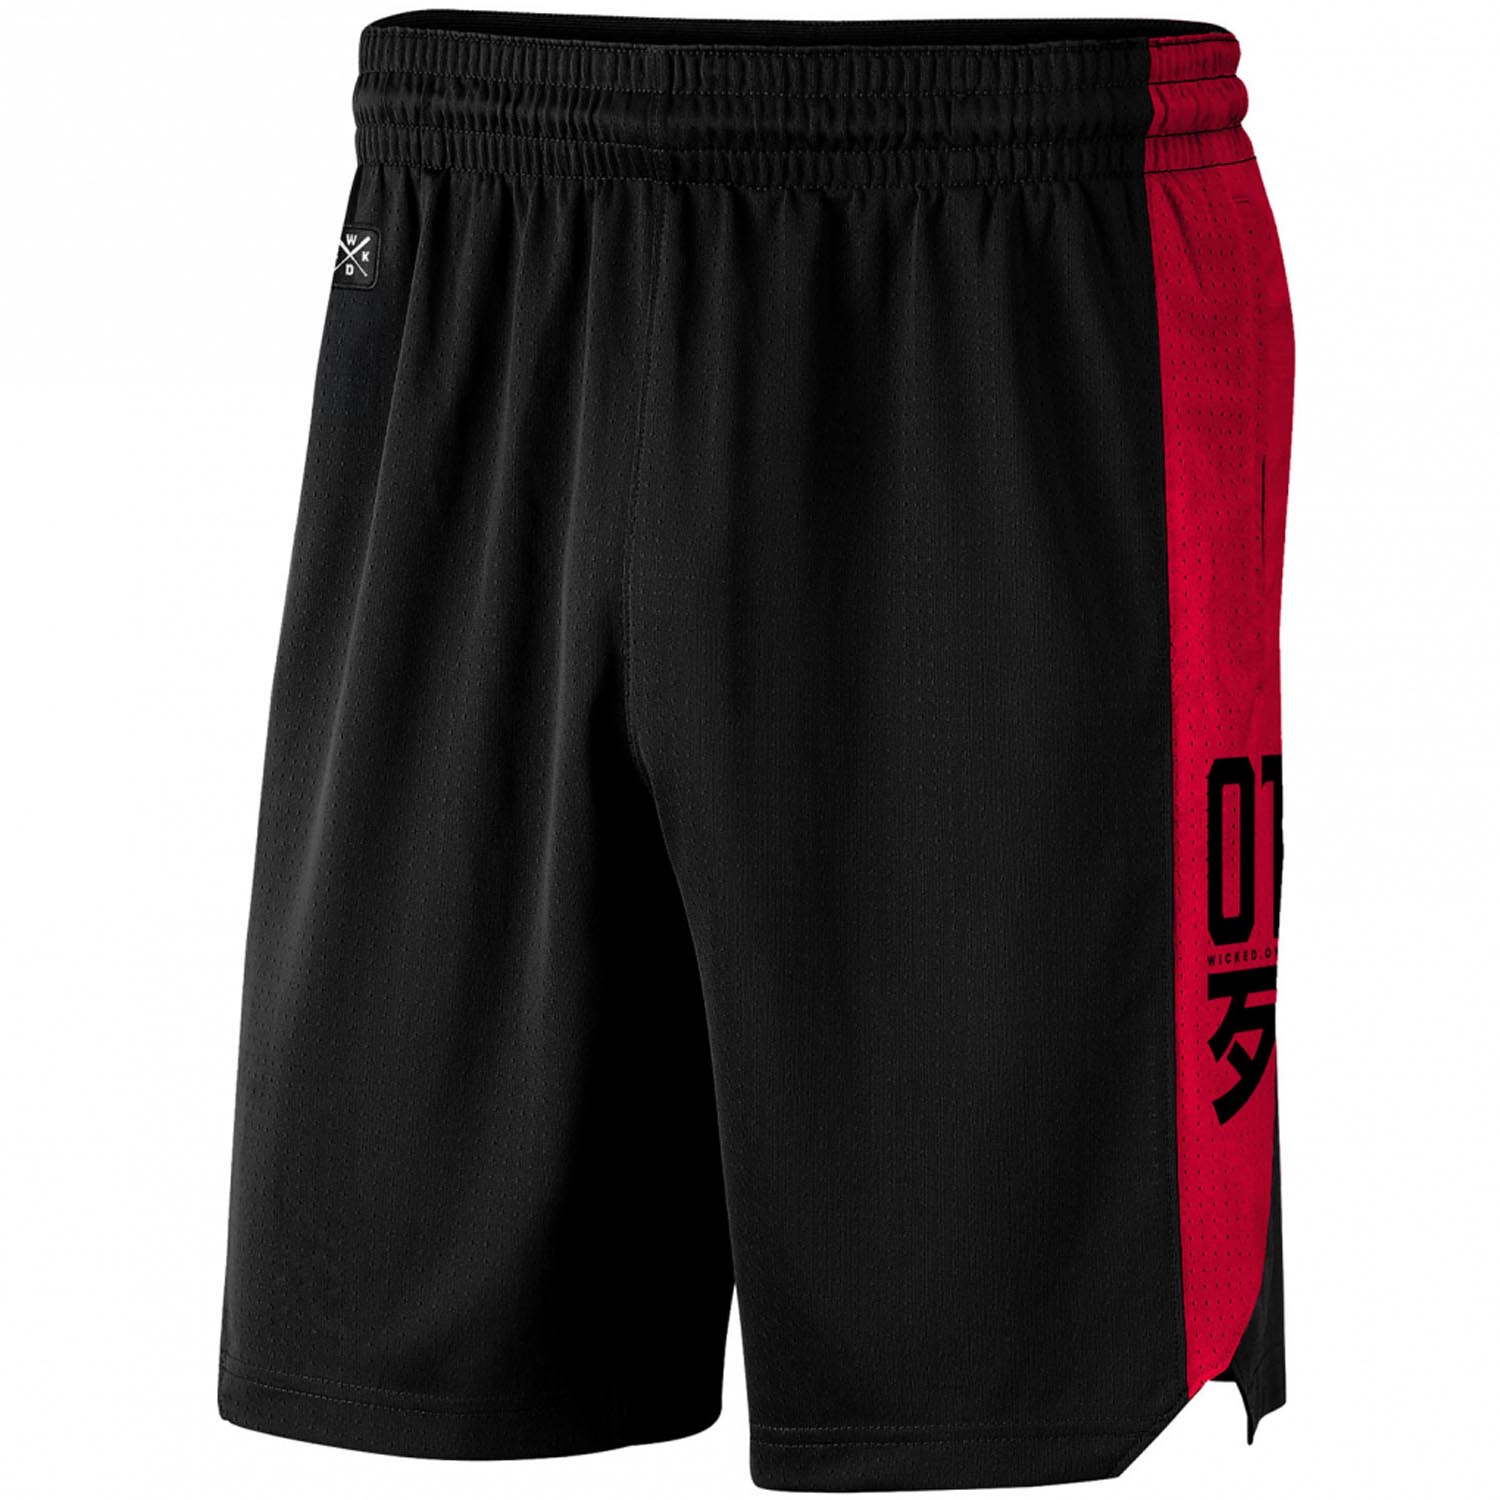 Wicked One Fitness Shorts, Indian, black-red, S